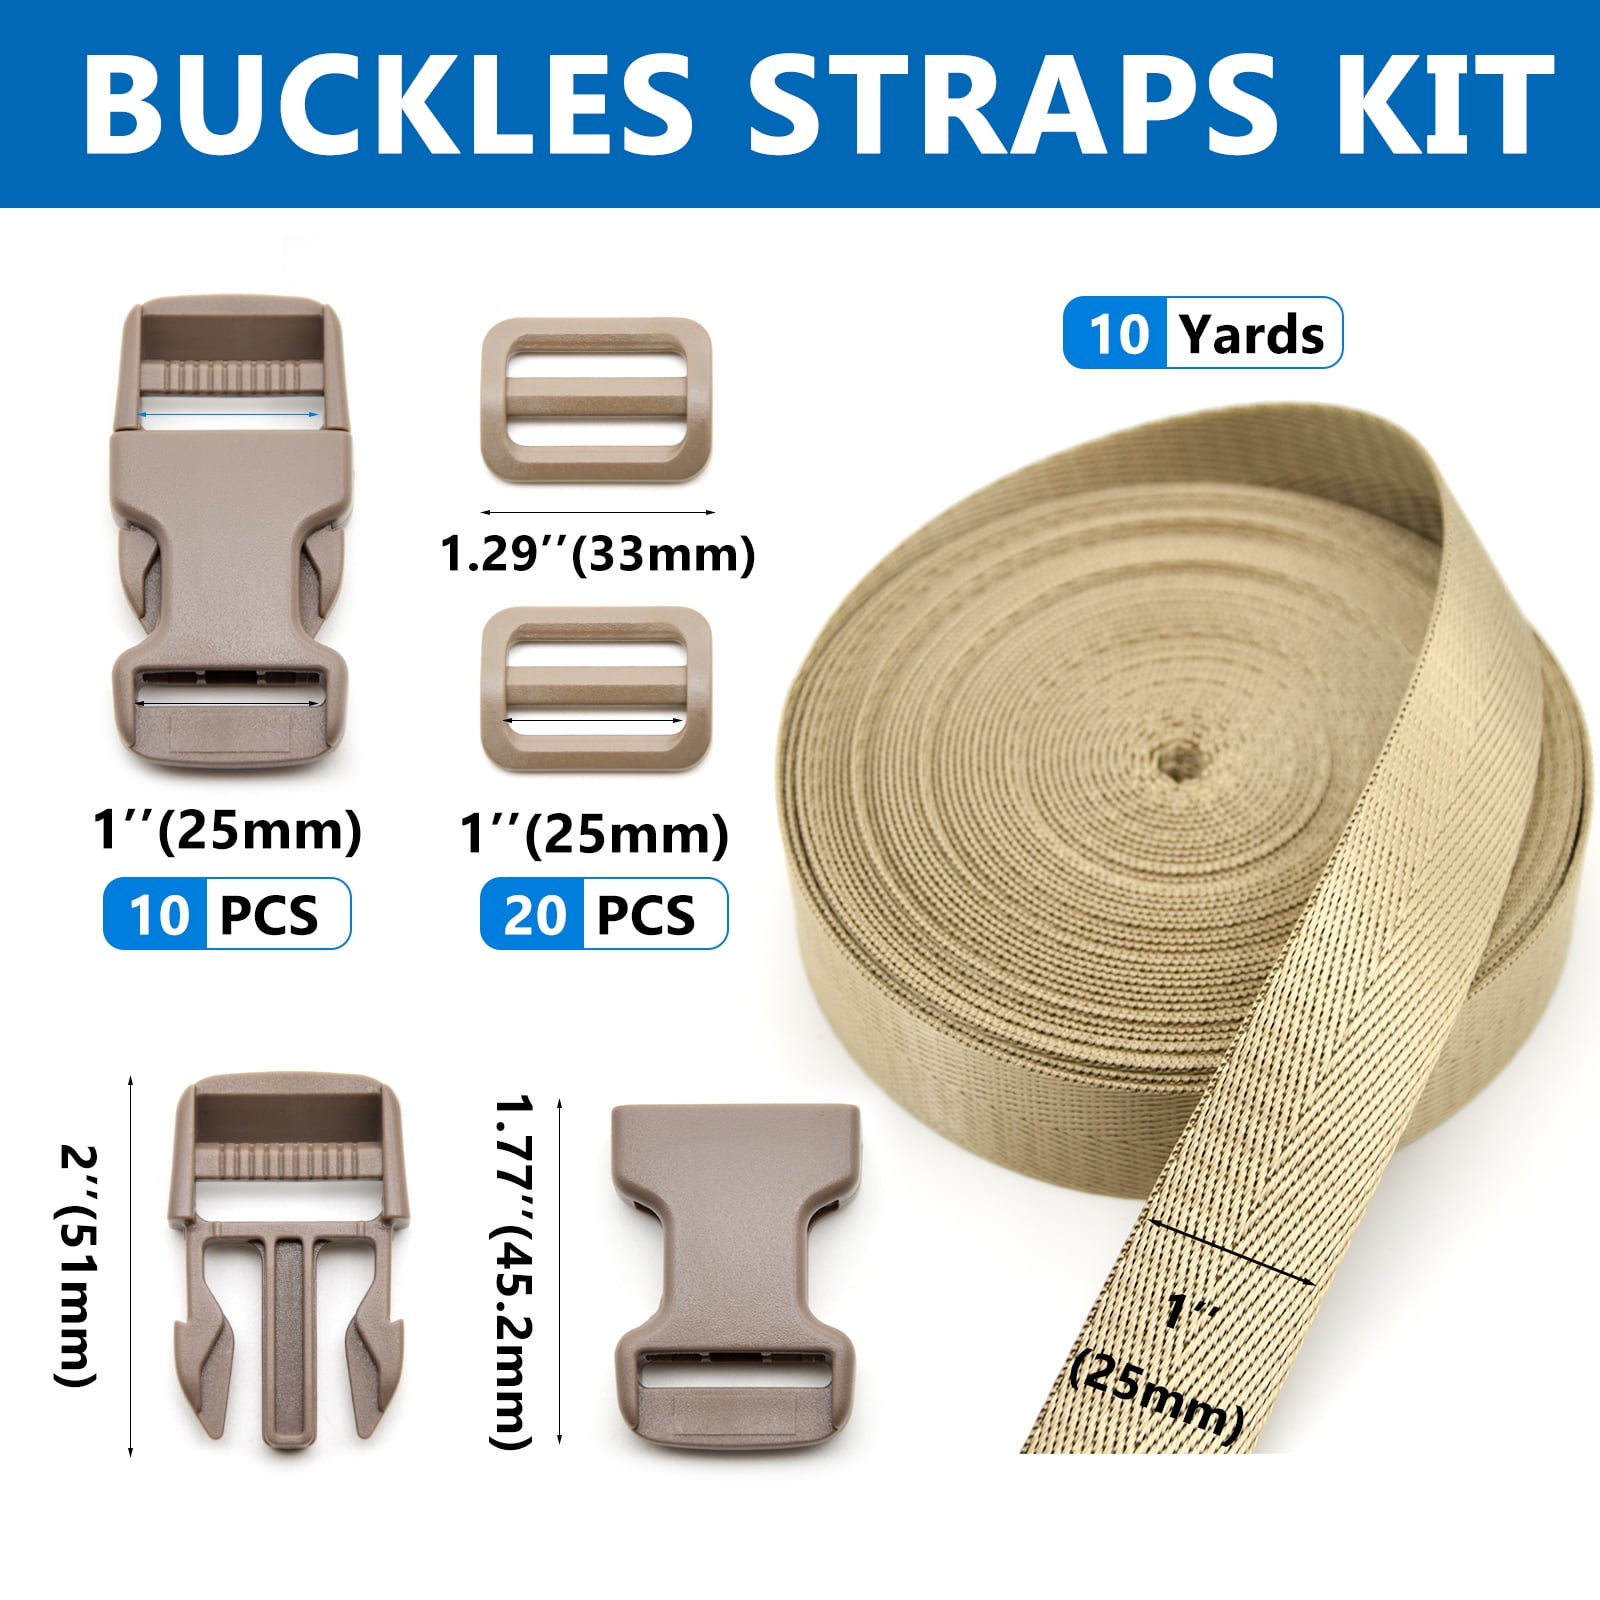  Buckle Straps 1 Inch Nylon Webbing Straps 9.8 Yards with  Plastic Buckles Clips Quick Release Adjustable 6 Pcs + Cam Safety Buckles 6  Pcs + Tri-Glide Slide Clip 12 PCS Heavy Duty Backpack Dog Collar